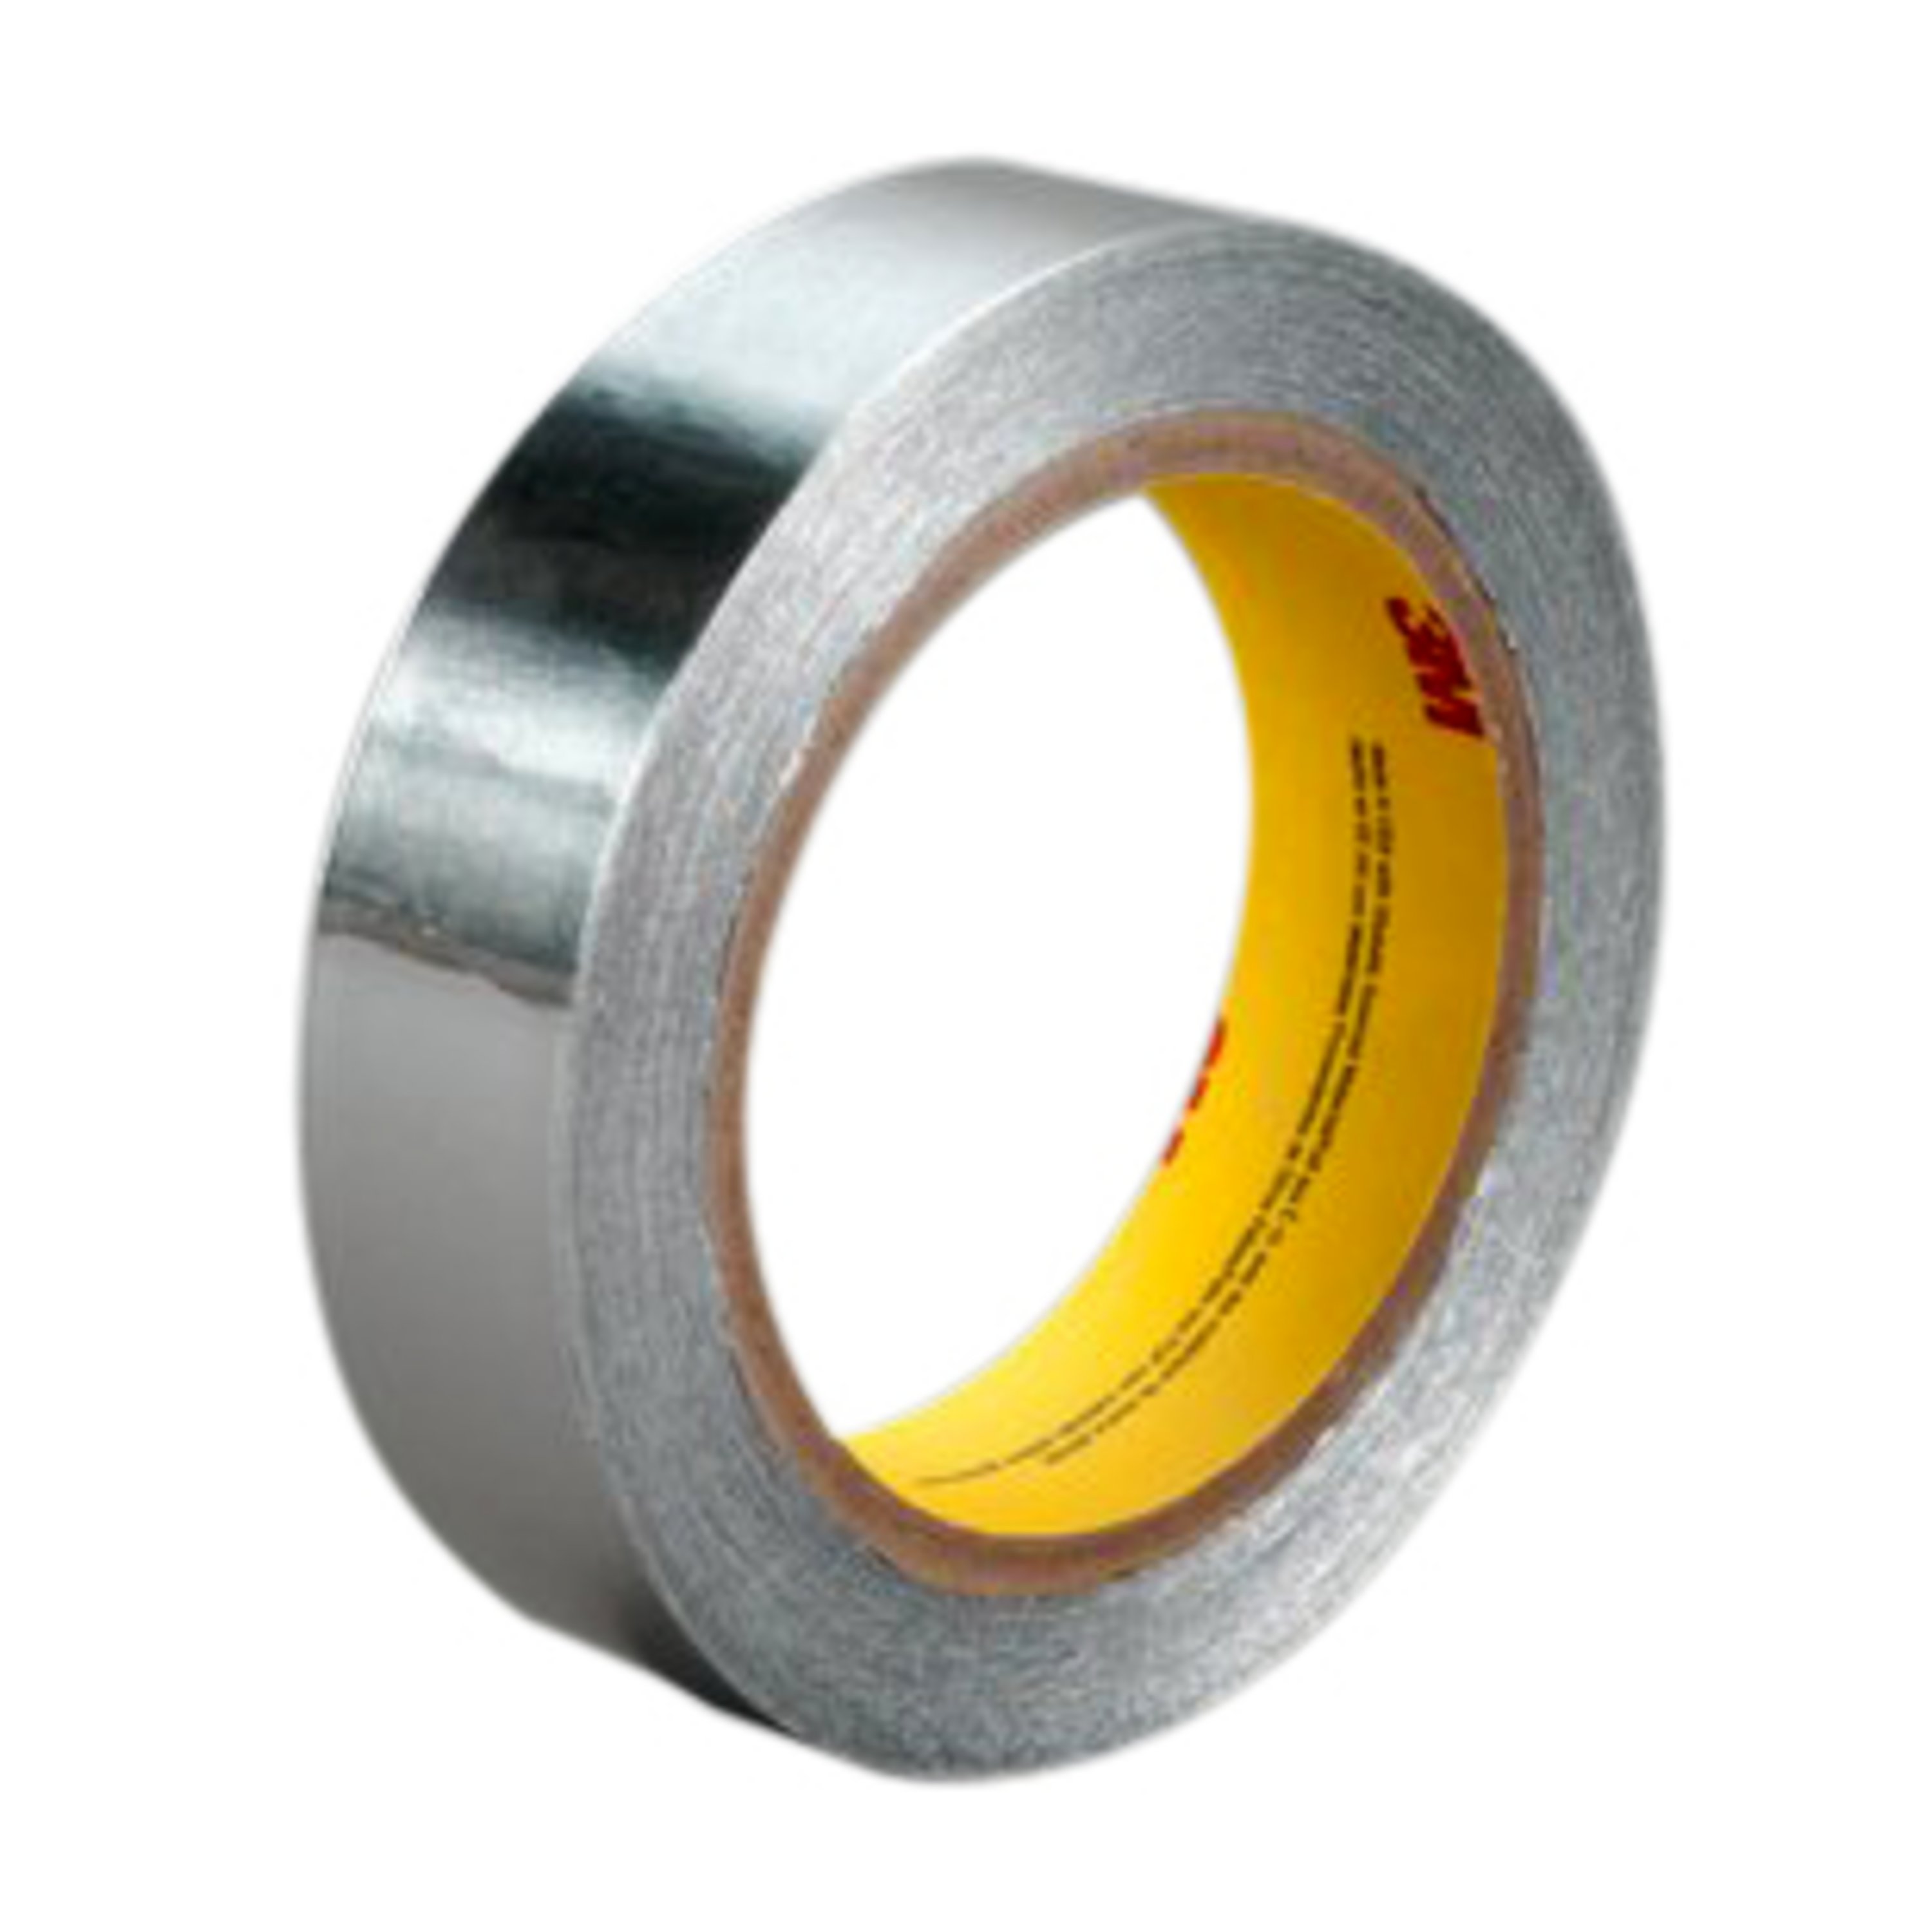 Consisting of a dead soft, thermally conductive aluminum backing, 3M™ Aluminum Foil Tape 431 dissipates heat over the surface of the tape to reduce hot spots and protect the substrate from the effects of high temperatures